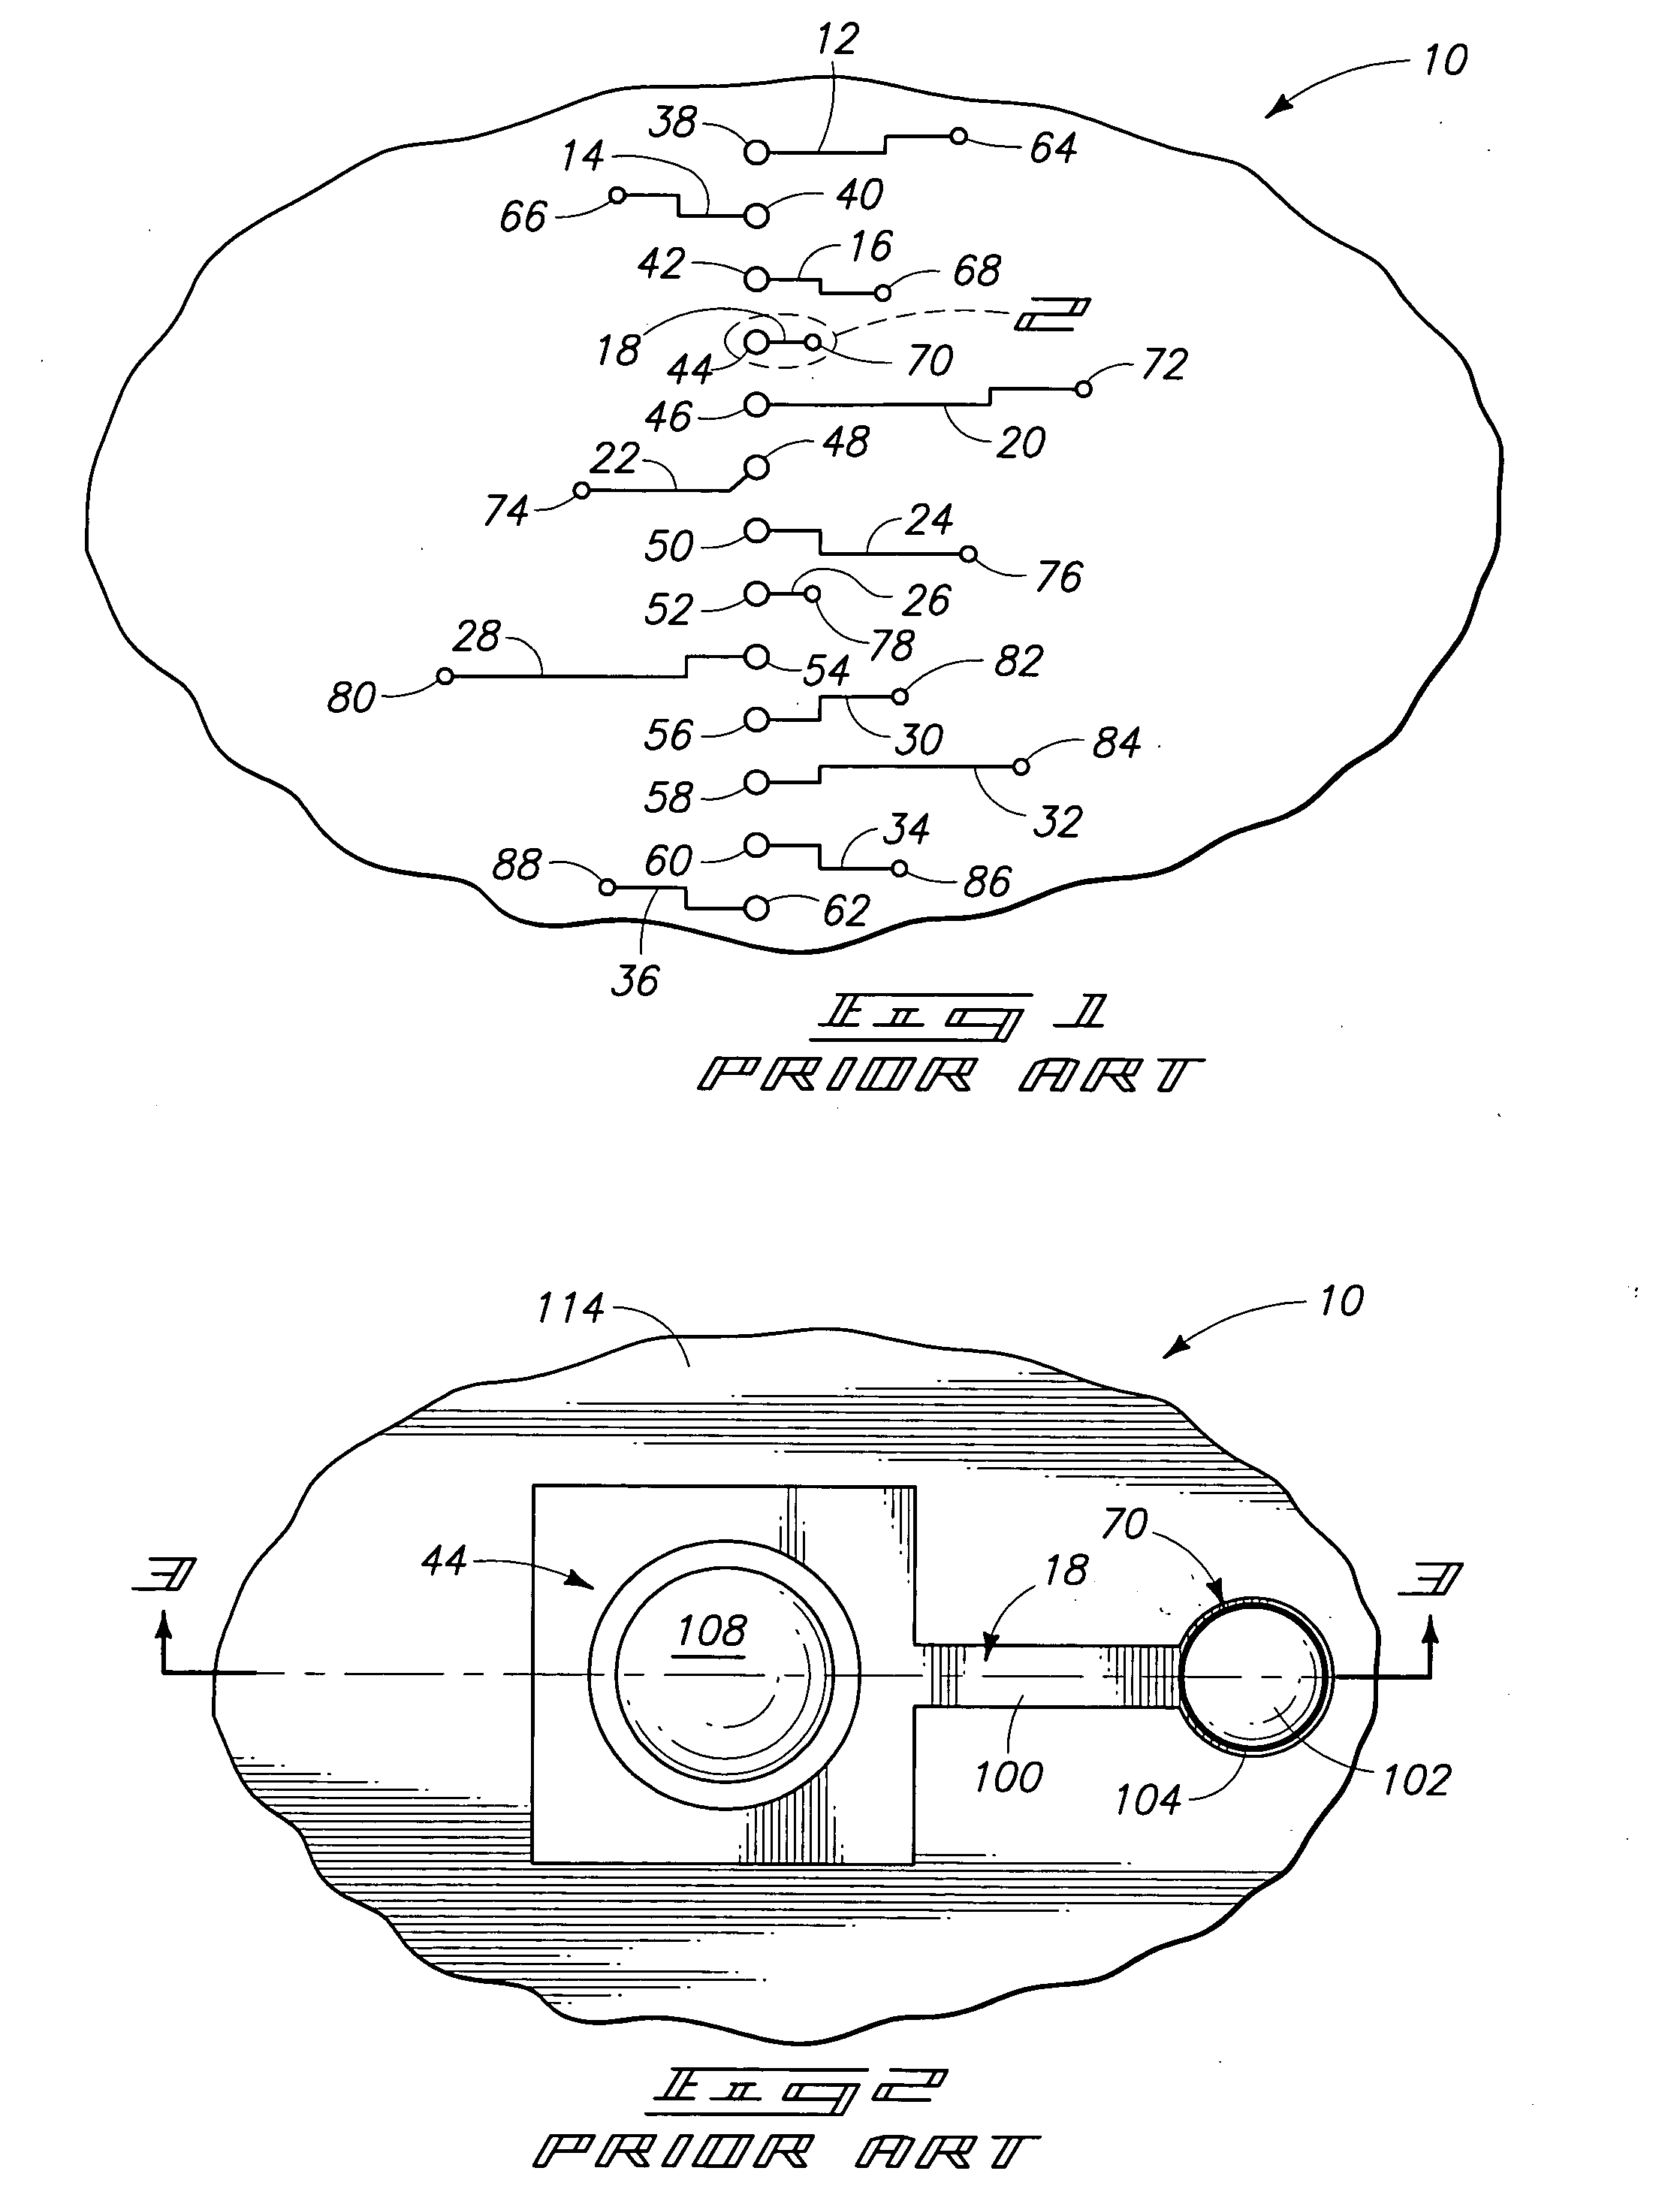 Methods of fabricating interconnects for semiconductor components